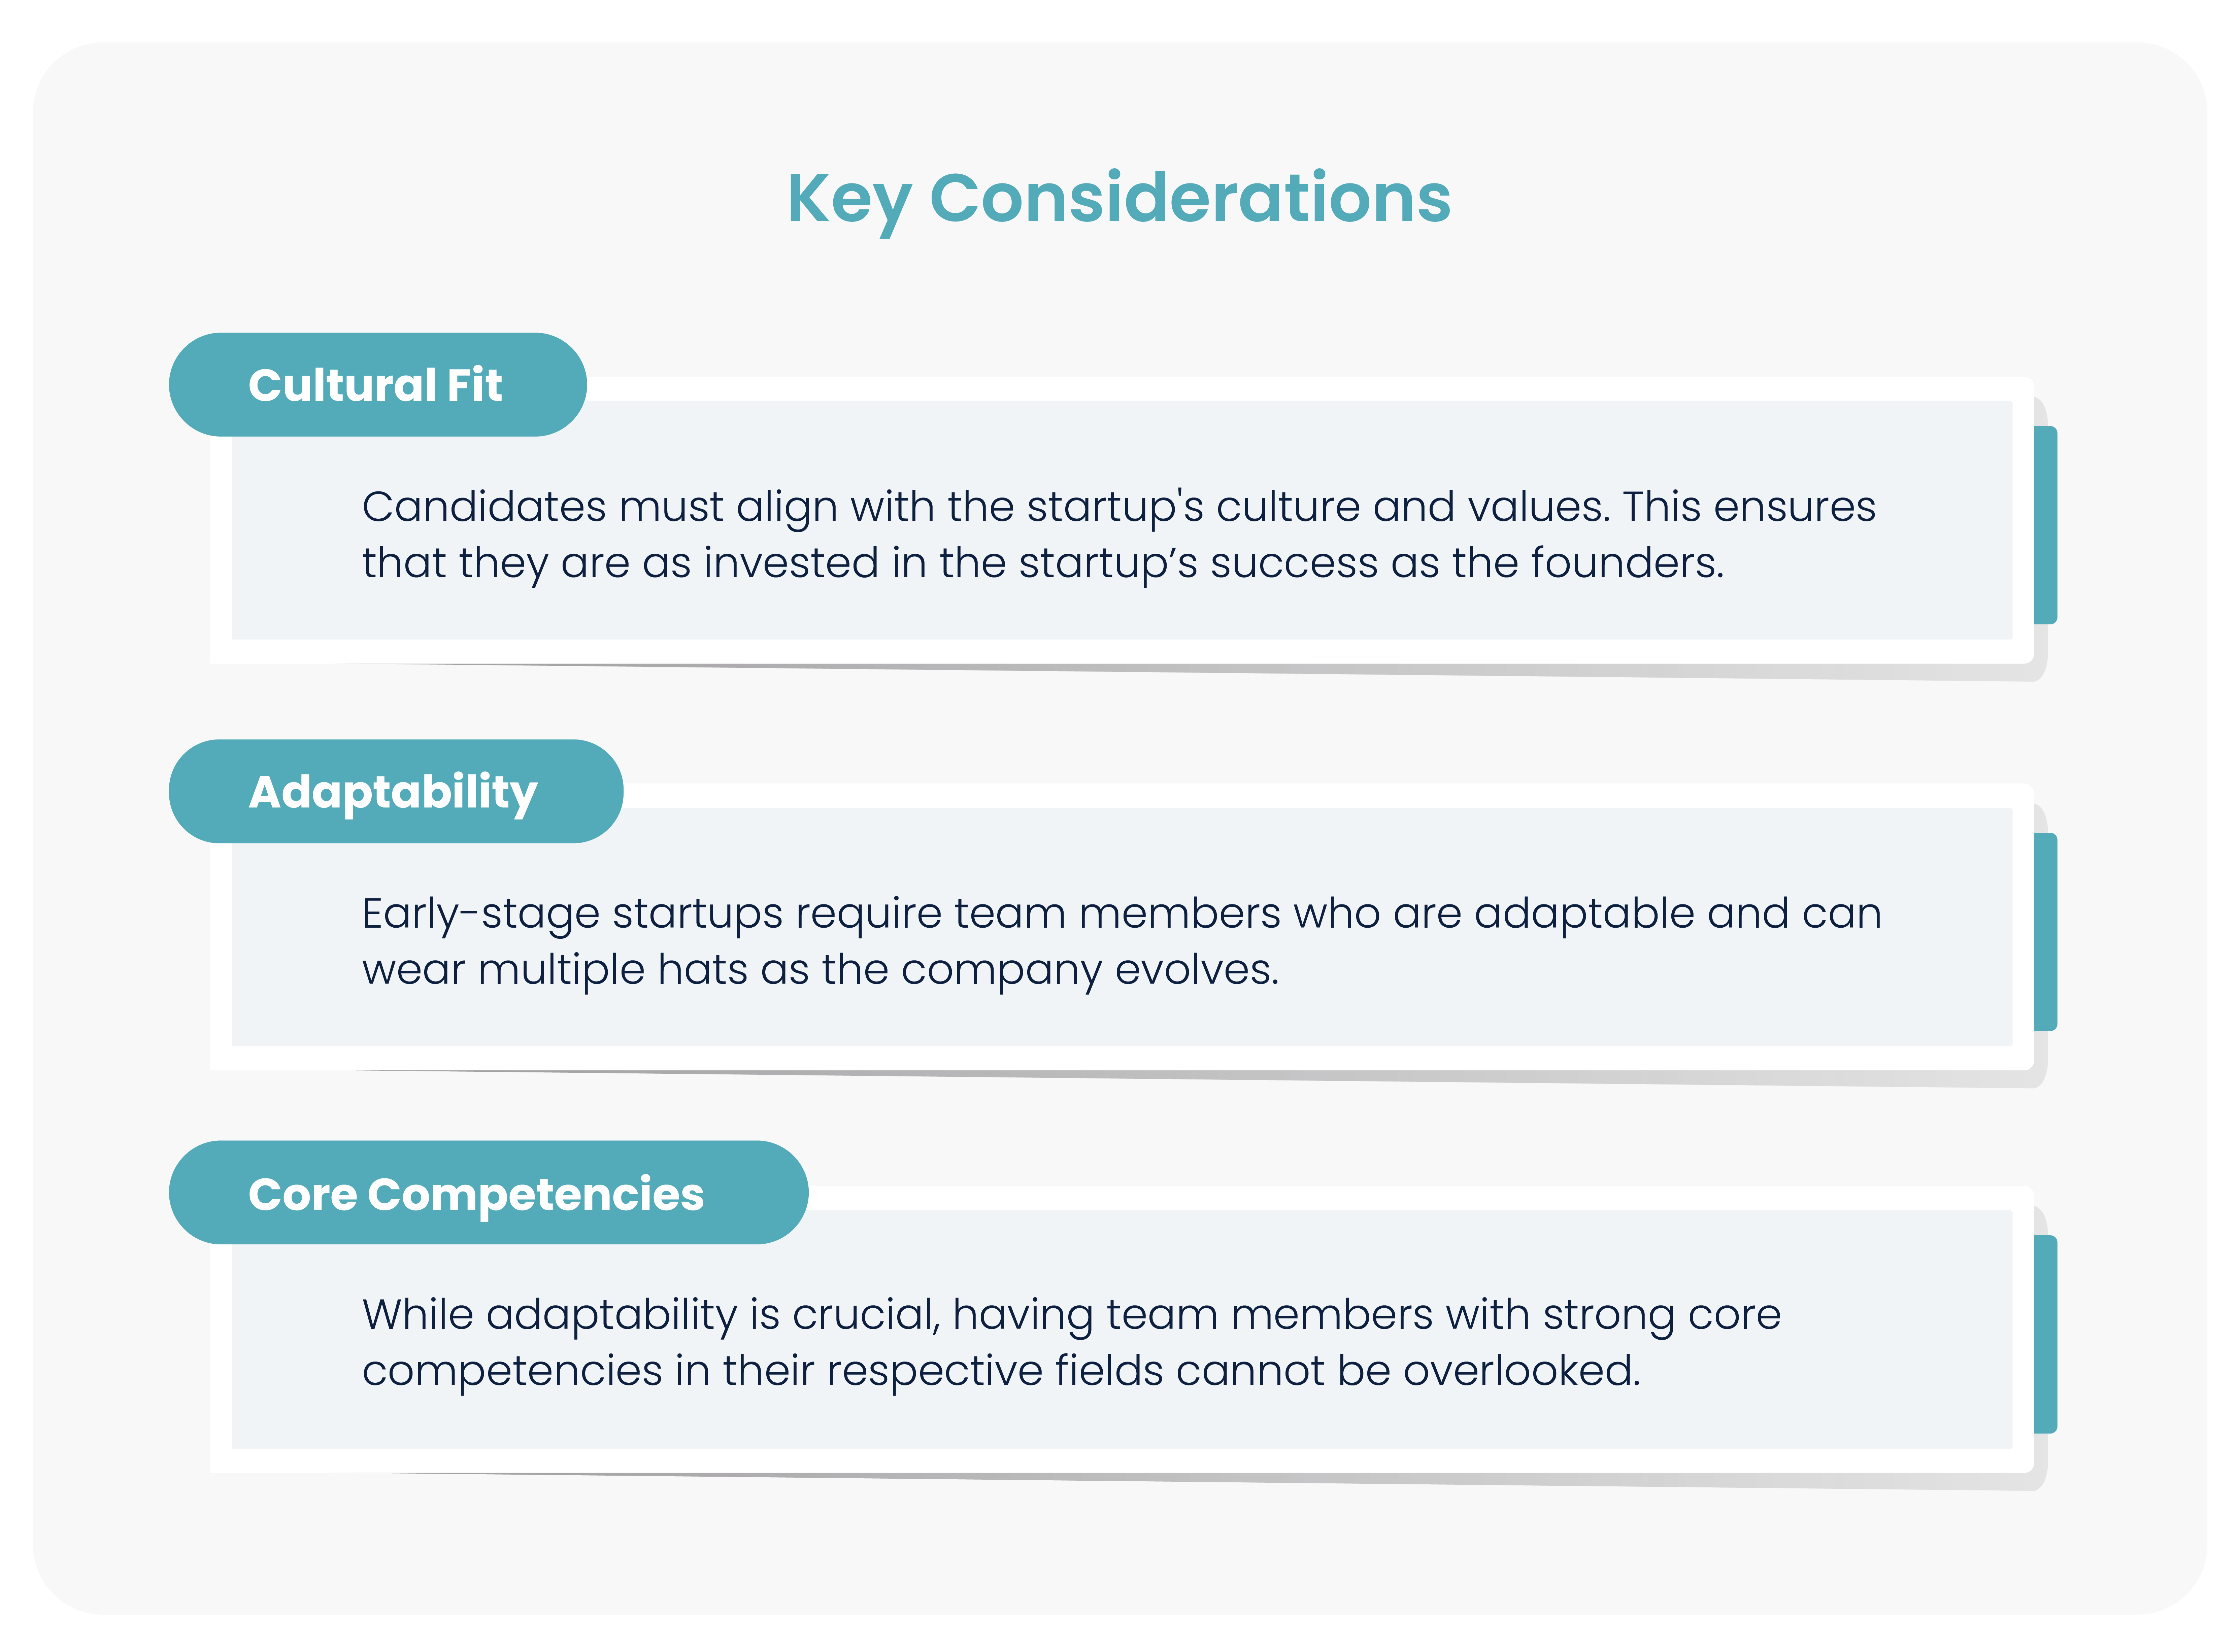 Strategies for successful C-level hires in seed-stage startups.